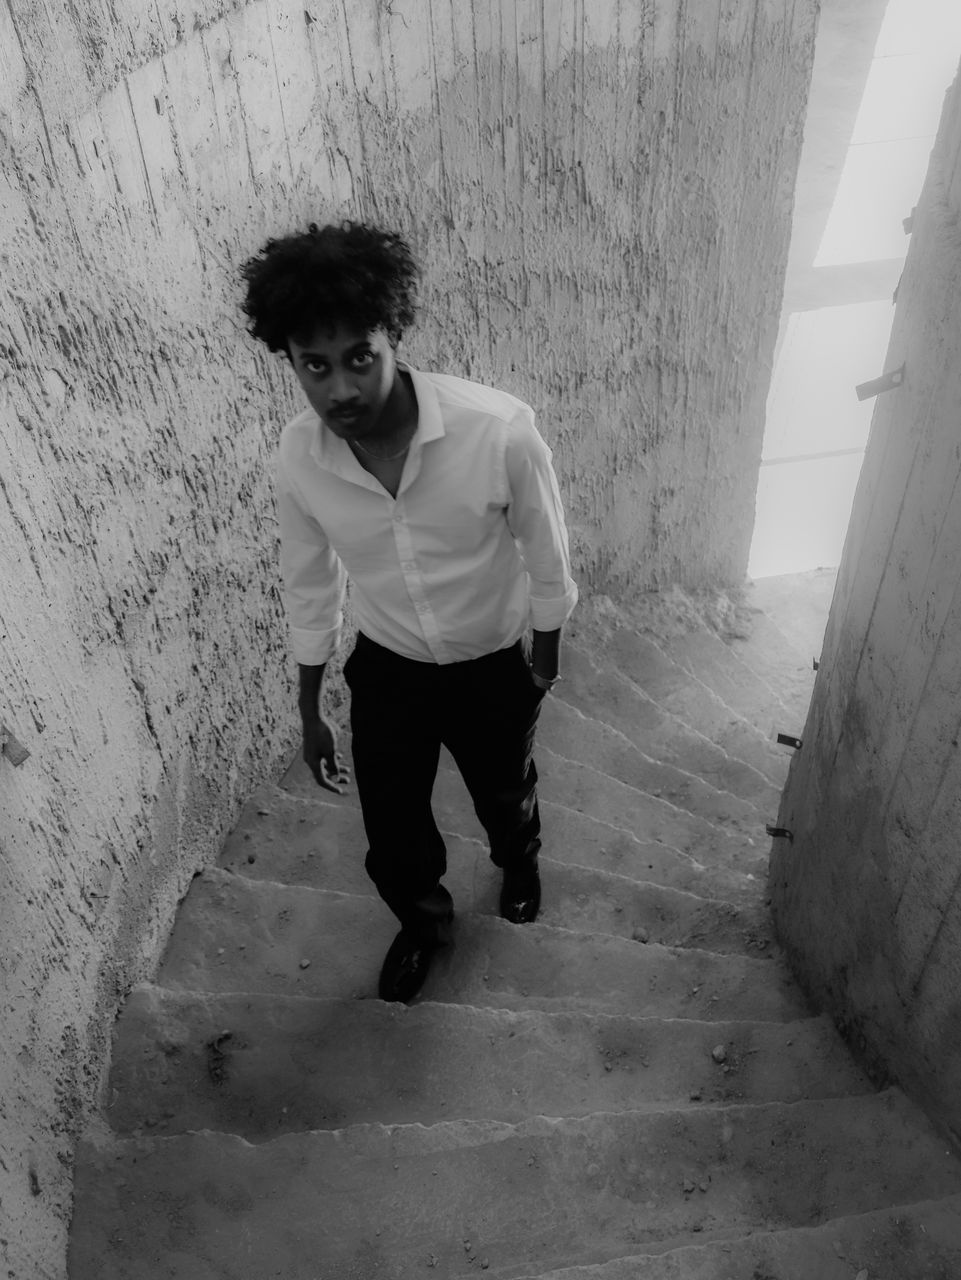 white, black, one person, full length, black and white, architecture, monochrome, monochrome photography, wall - building feature, casual clothing, young adult, lifestyles, adult, snapshot, staircase, leisure activity, men, standing, front view, built structure, day, steps and staircases, footwear, sitting, portrait, outdoors, looking